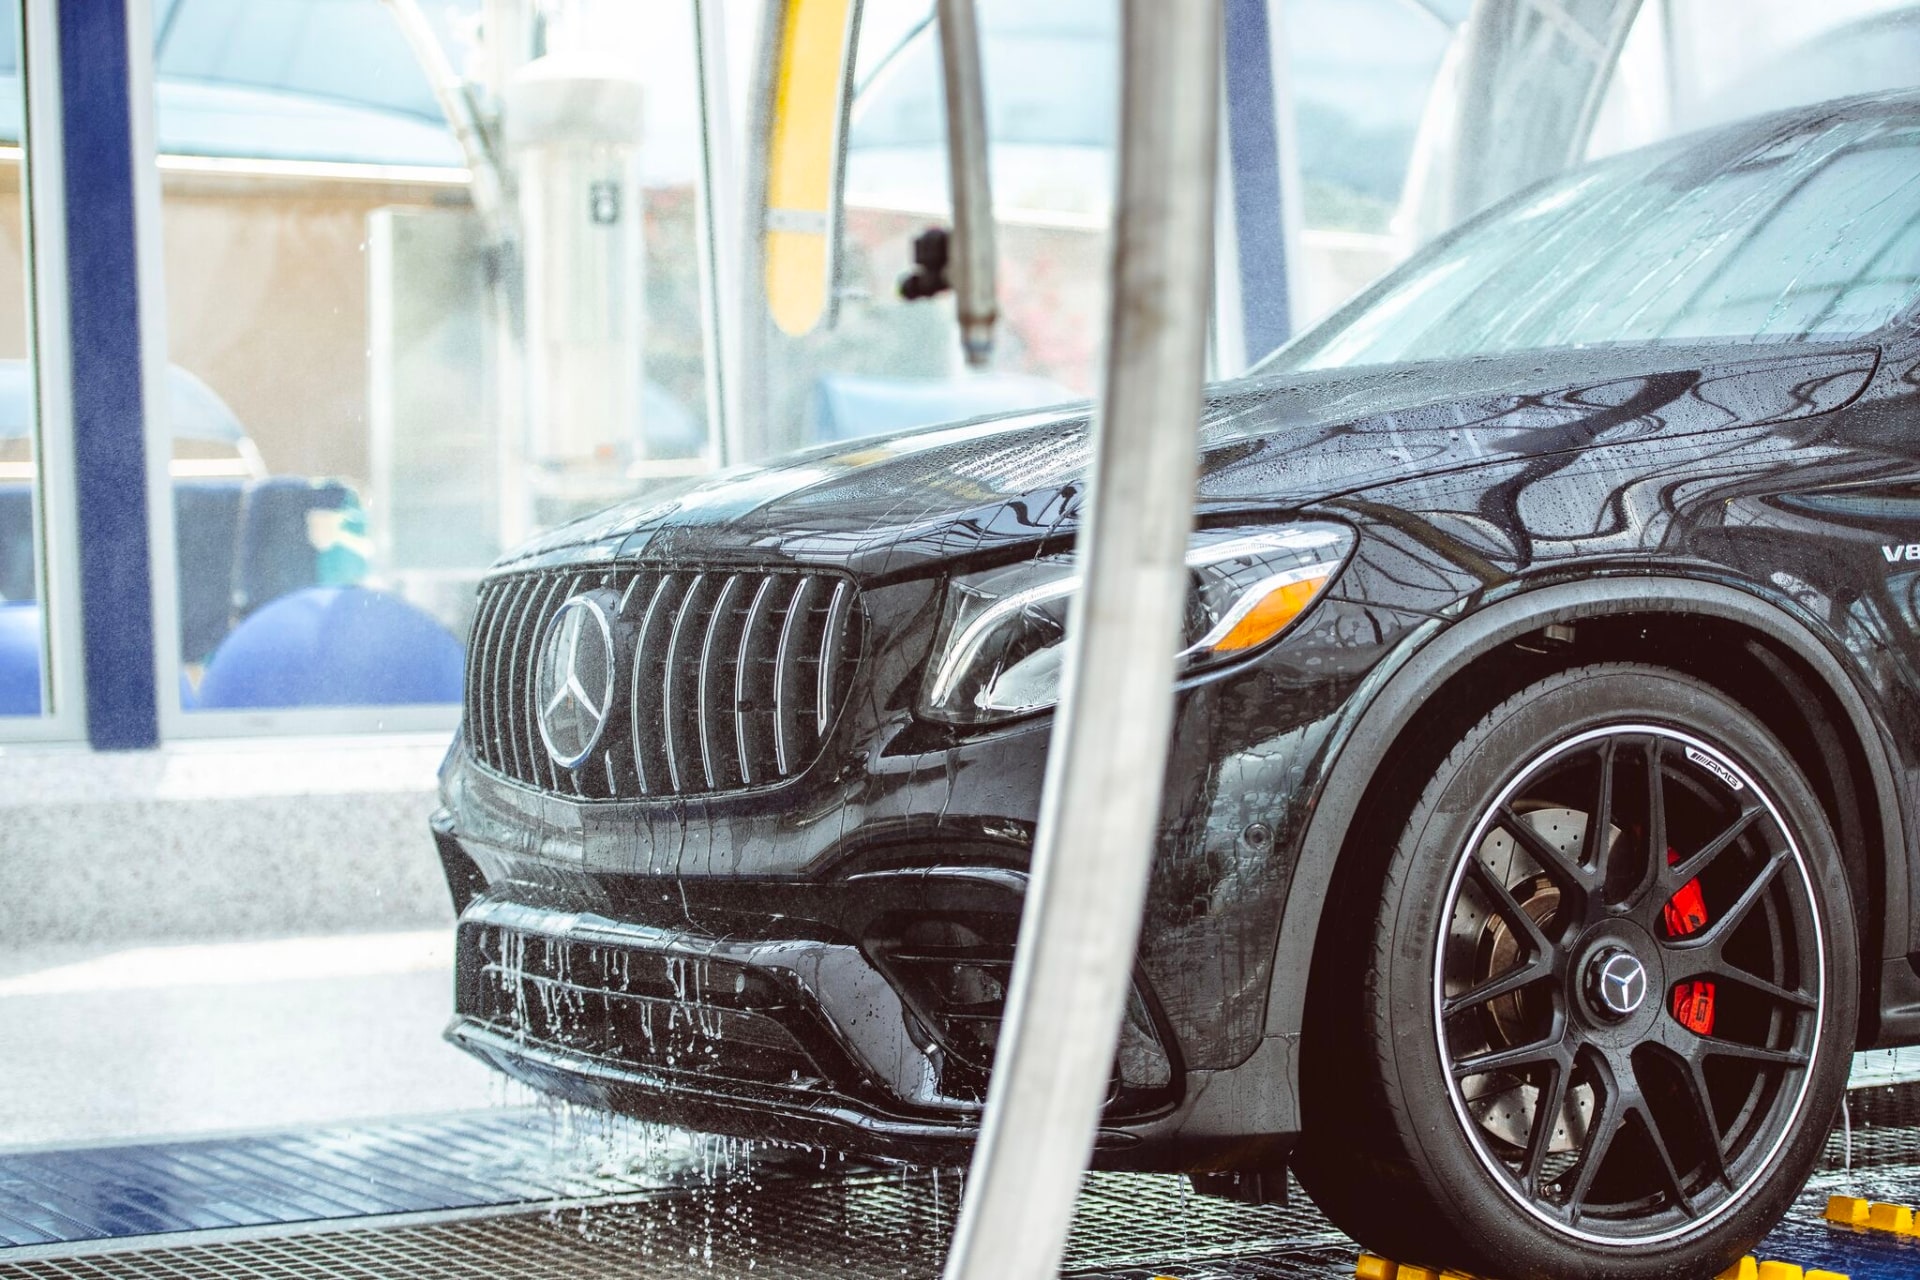 Knoxville Car Wash and Detailing